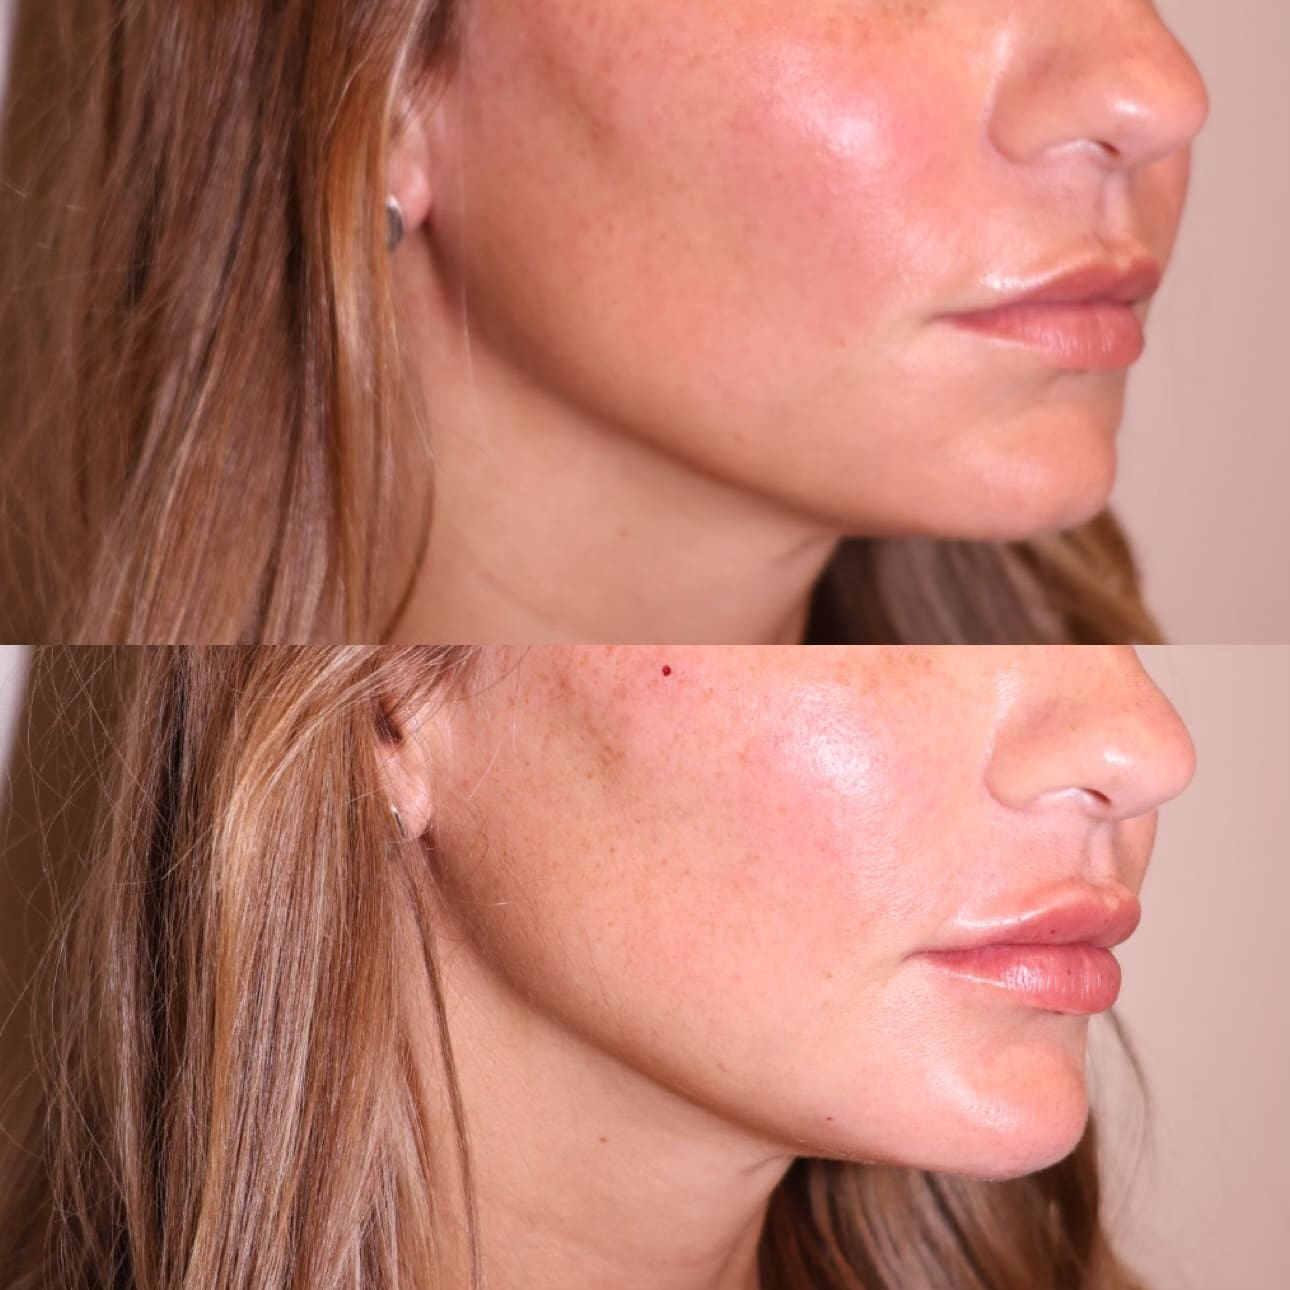 Women's face closeup showing results of lip and chin filler